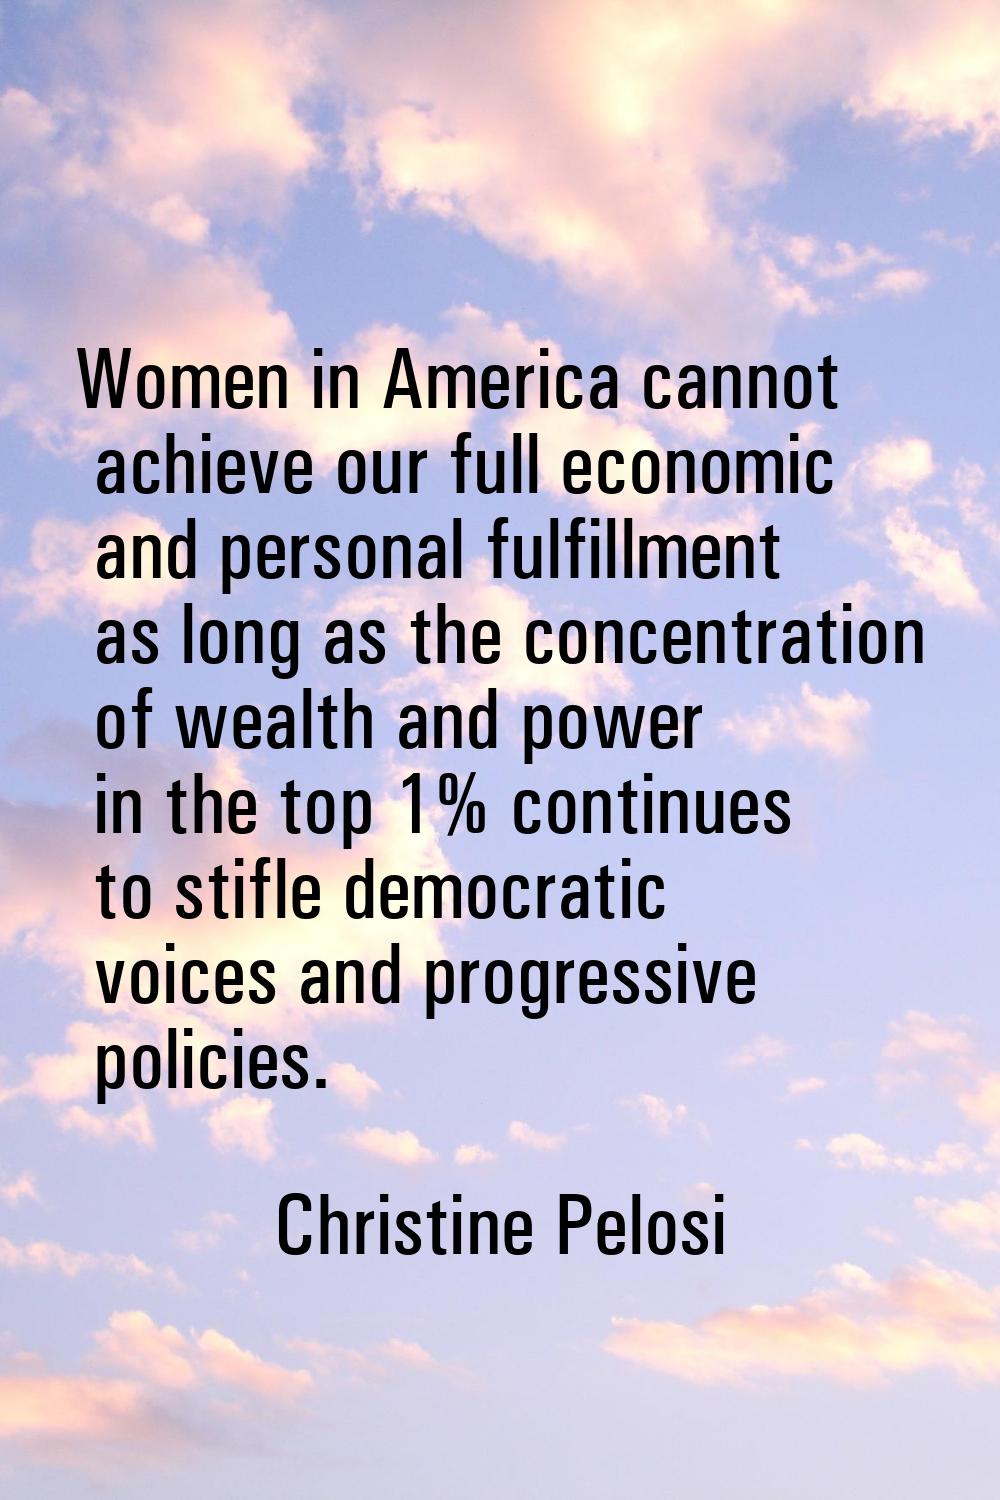 Women in America cannot achieve our full economic and personal fulfillment as long as the concentra